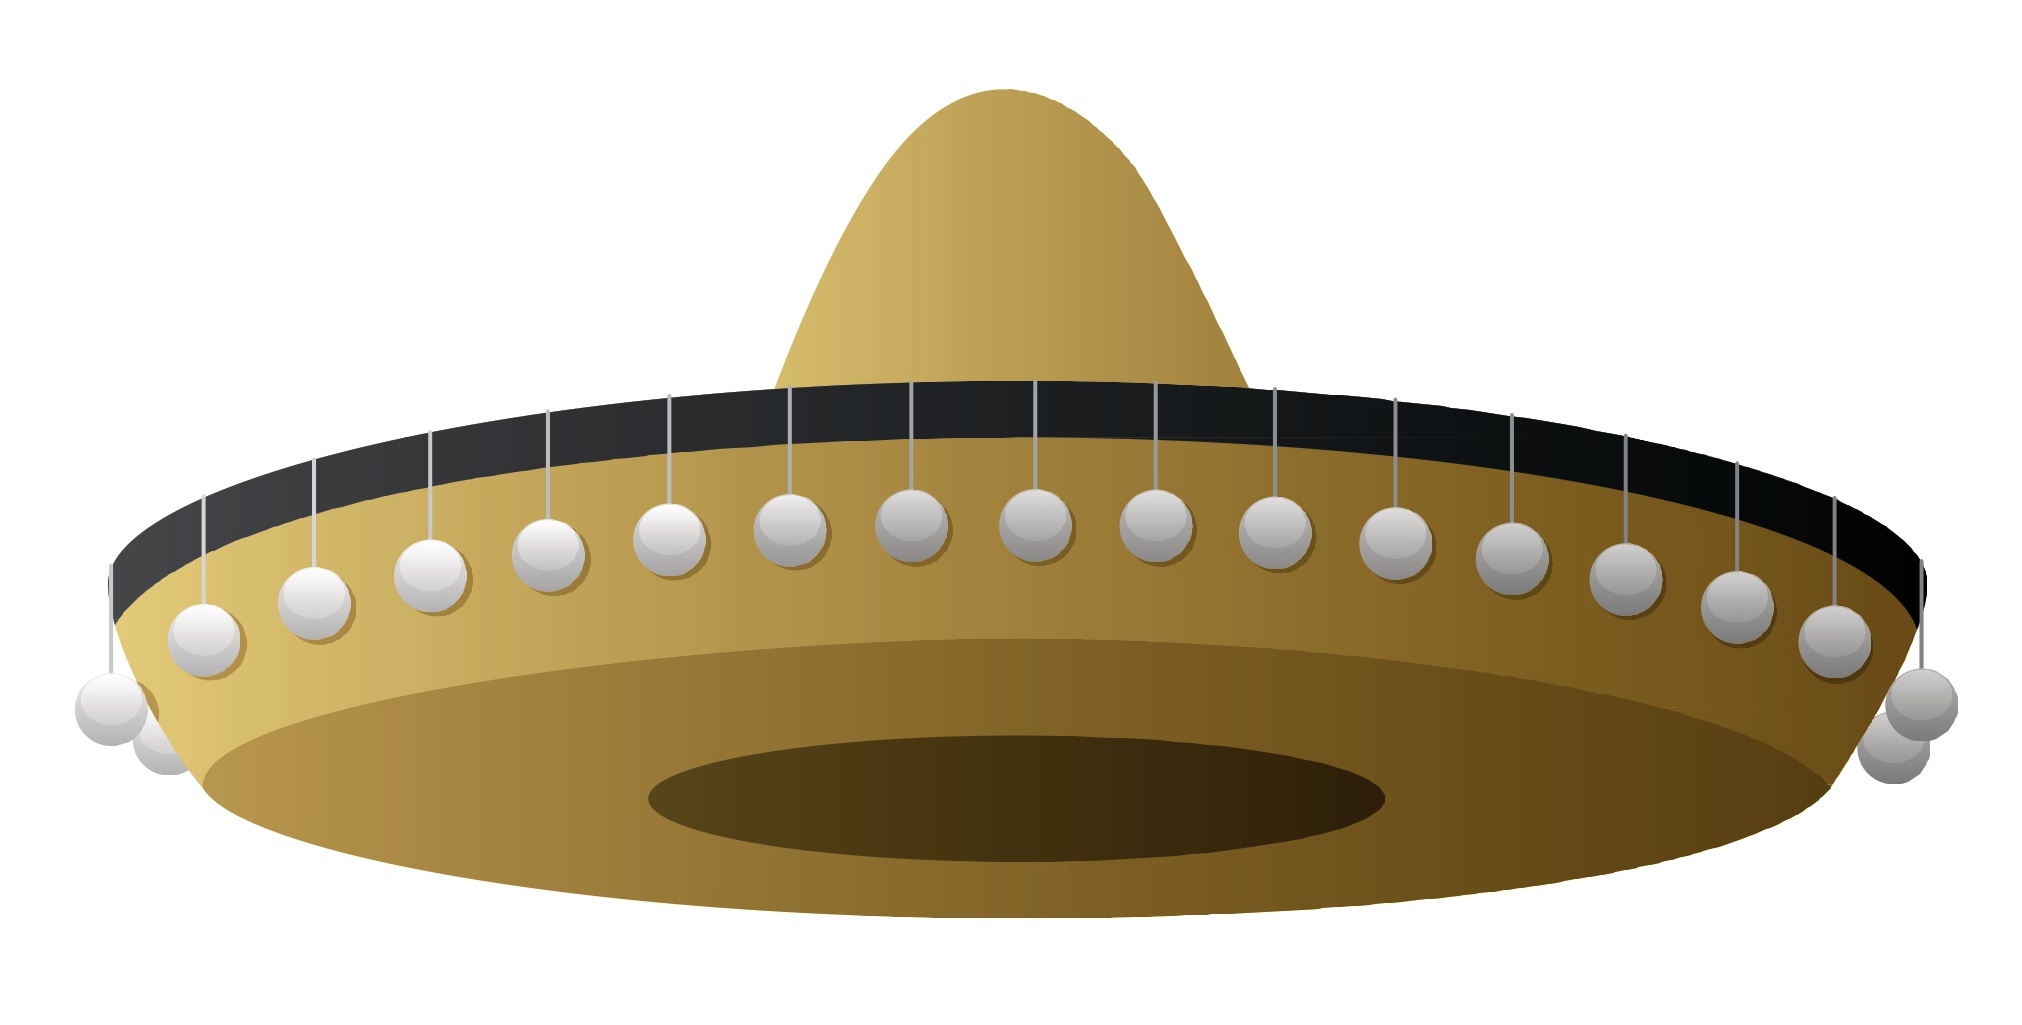 Sombrero Mexicano Png - Clipart library - Clipart library